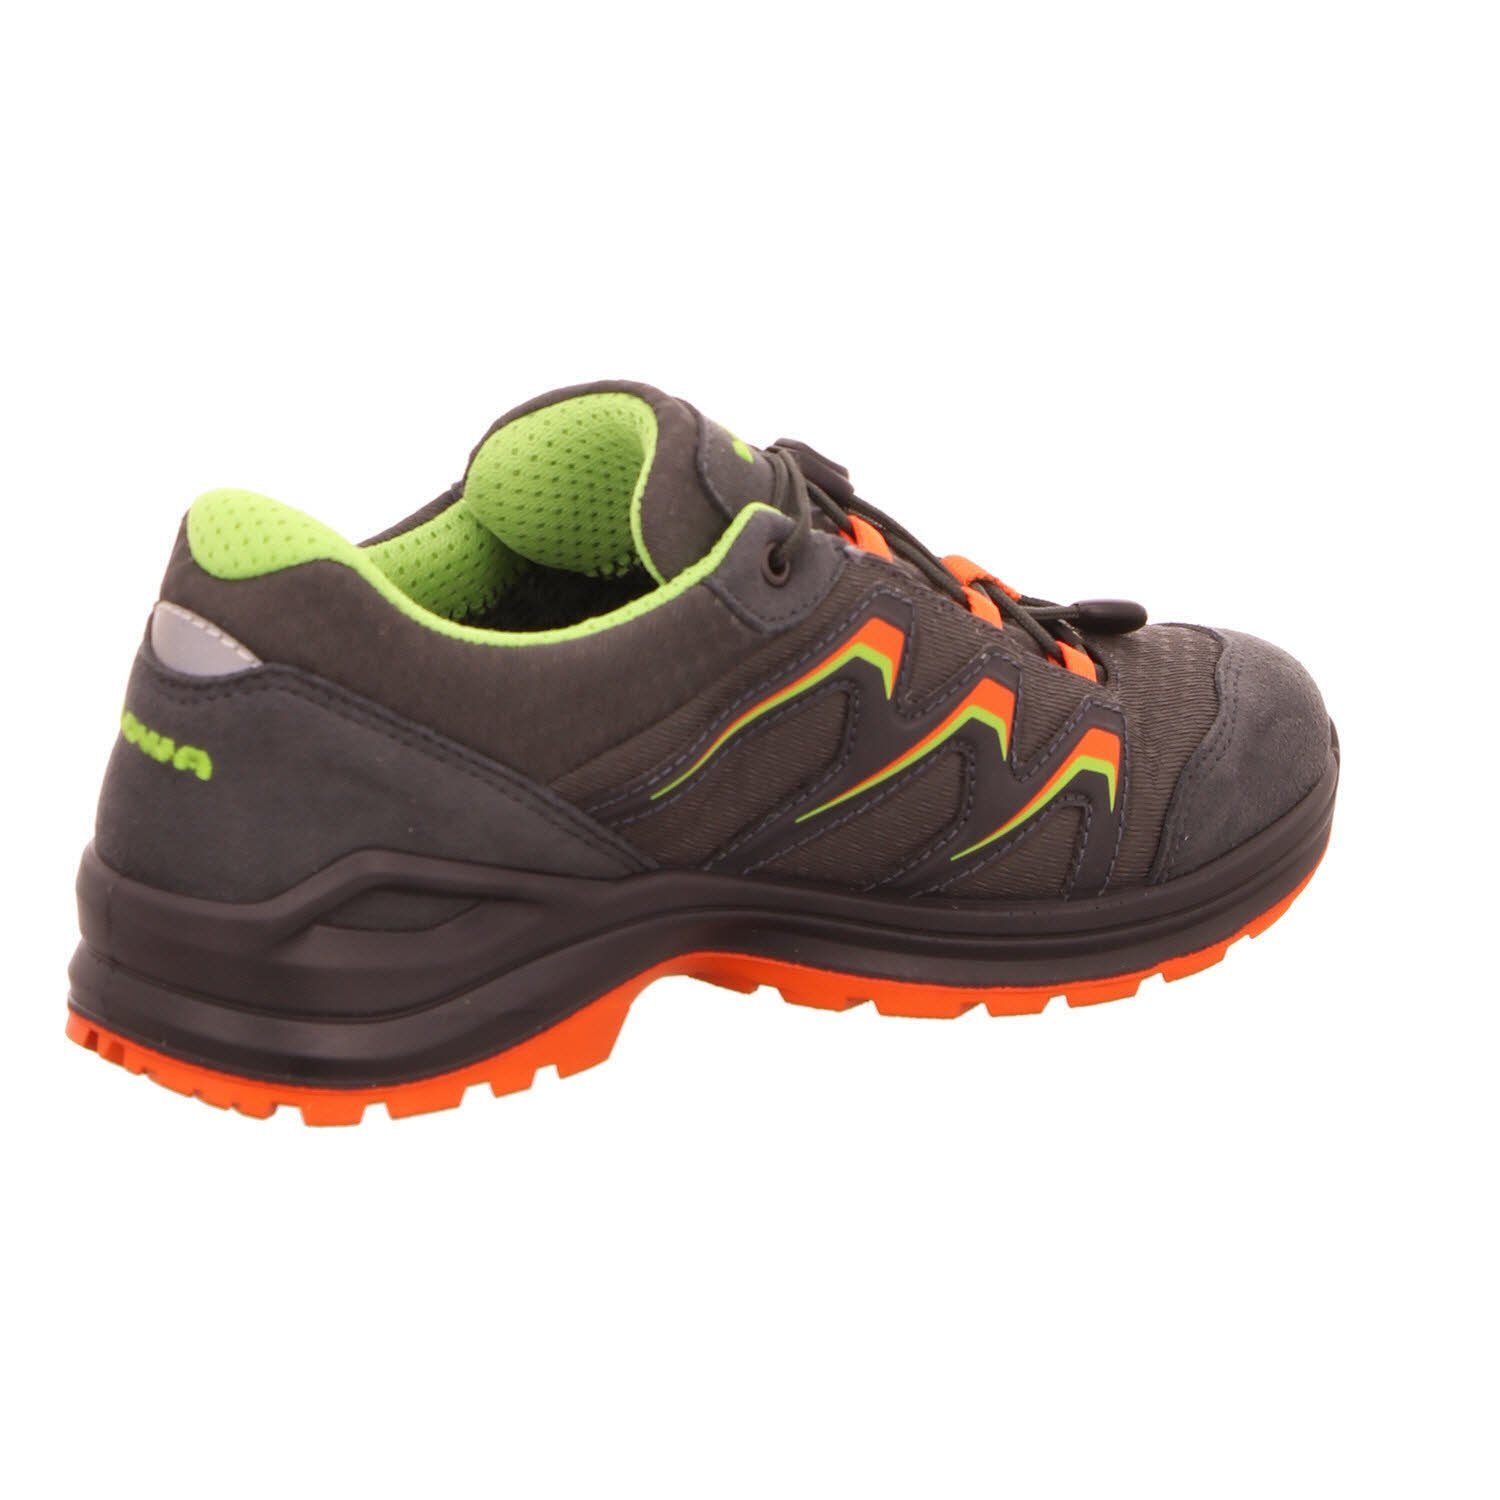 Lowa GRAPHIT/FLAME Outdoorschuh